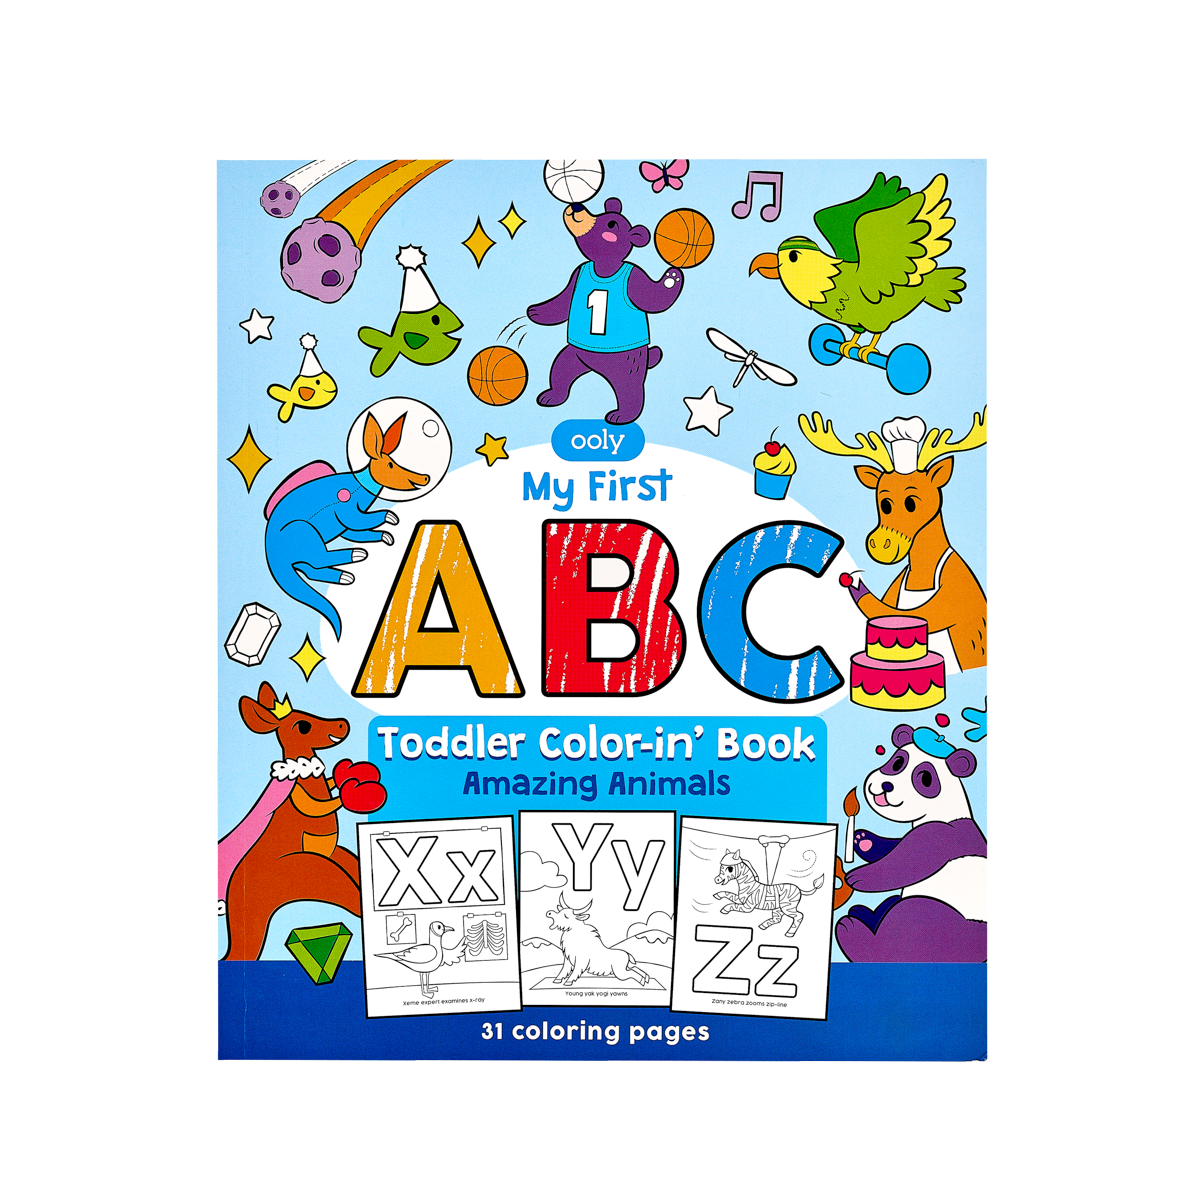 ABC BIG & JUMBO Coloring Book for Toddlers: An Alphabet Toddler